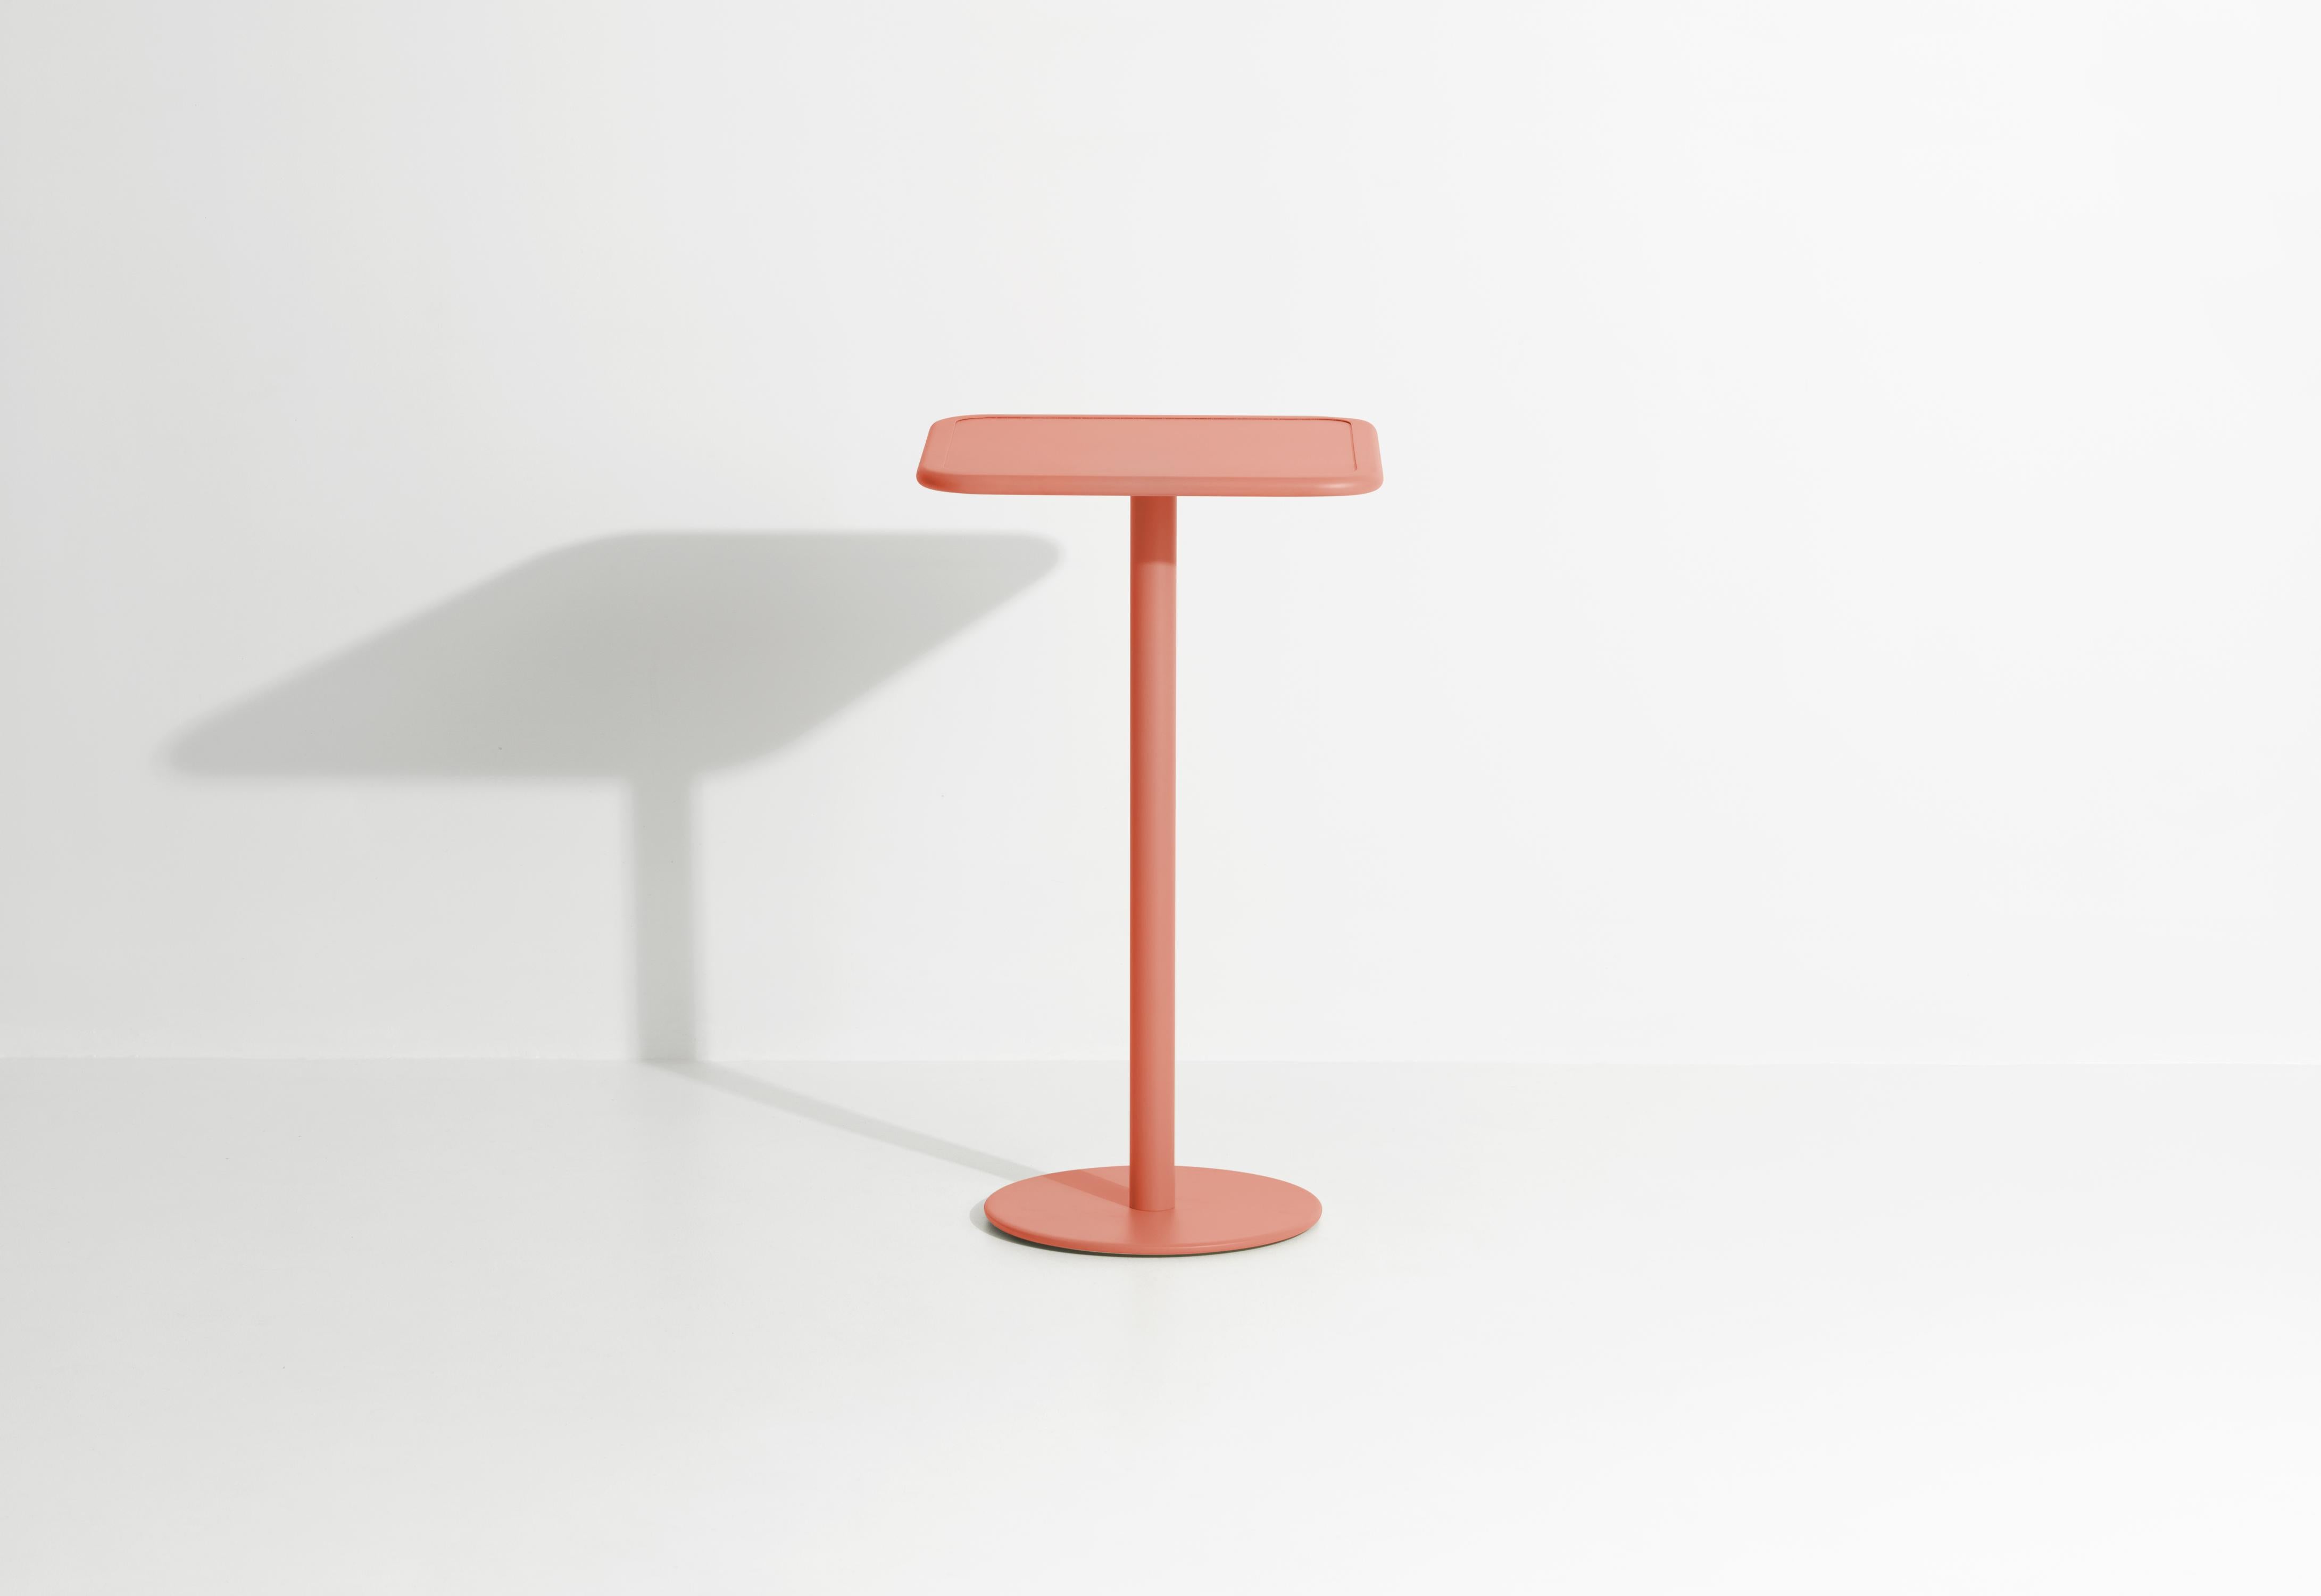 Petite Friture Week-End Square High Table in Coral Aluminium by Studio BrichetZiegler, 2017

The week-end collection is a full range of outdoor furniture, in aluminium grained epoxy paint, matt finish, that includes 18 functions and 8 colours for